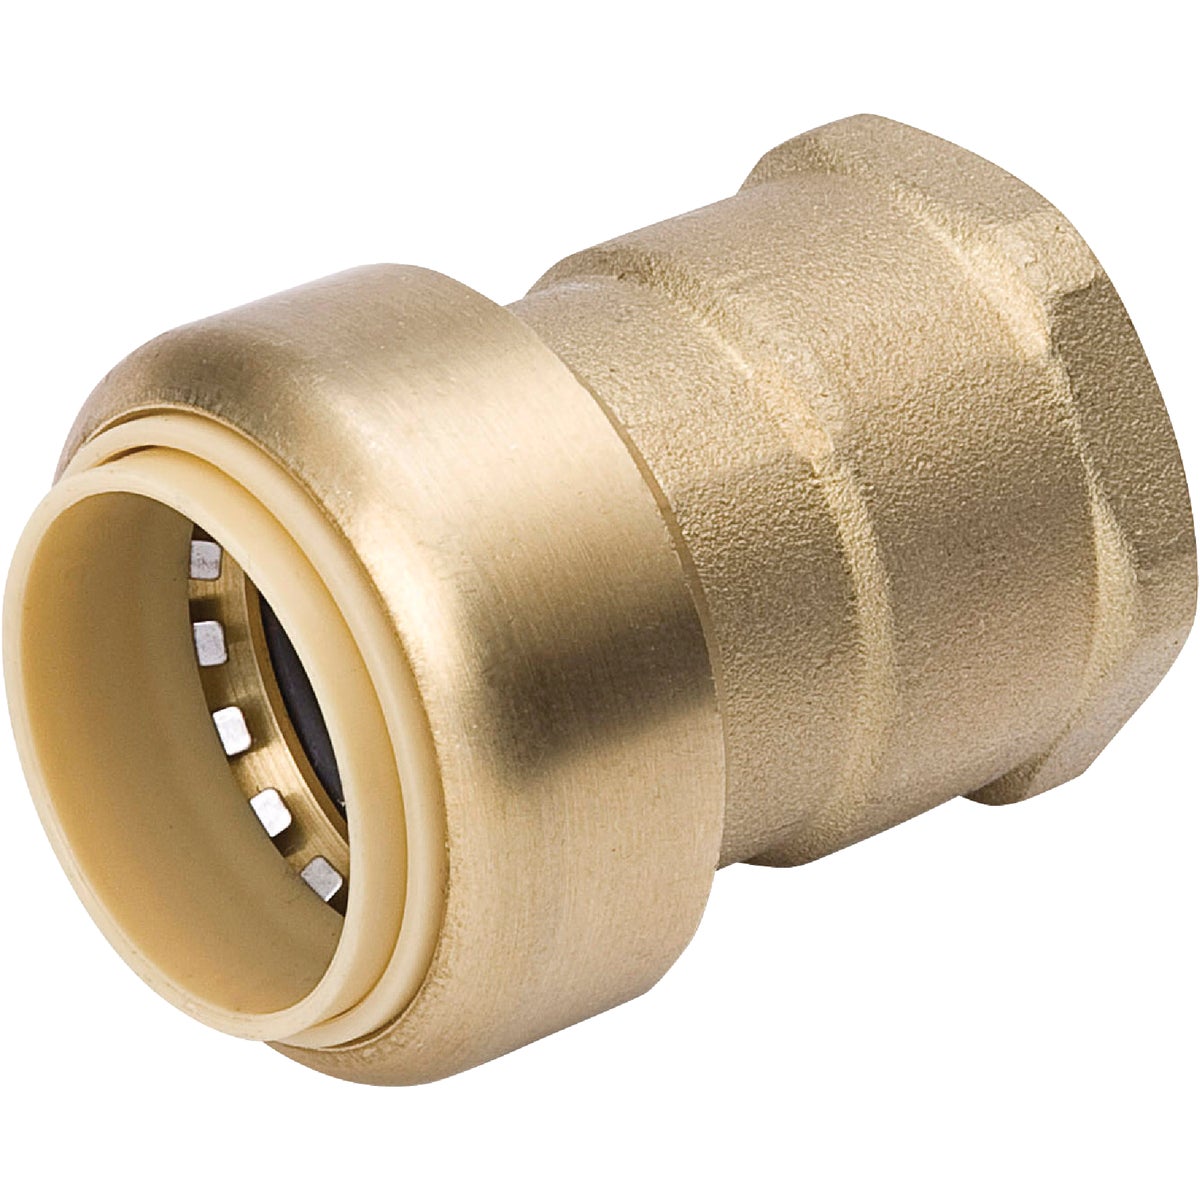 ProLine 1/2 In. x 1/2 In. FPT Brass Push Fit Adapter